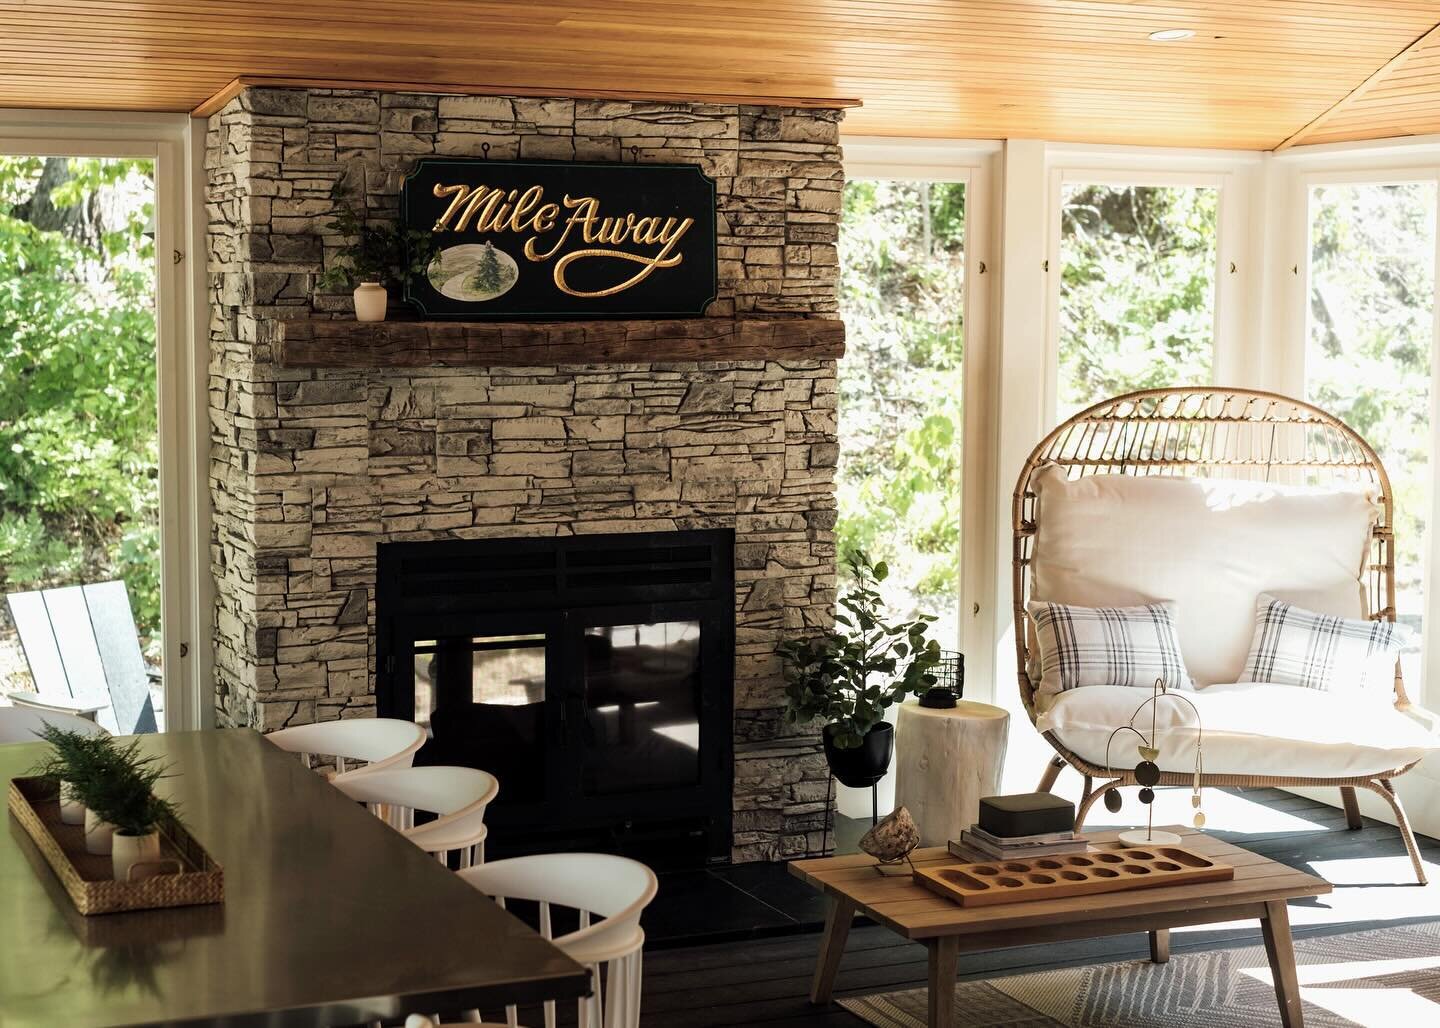 The sunroom at MileAway offers the most beautiful natural light from early morning to late afternoon, and at night, the crackling fire from our indoor/outdoor fireplace creates the coziest ambiance. This space, along with our hot tub patio, are the o